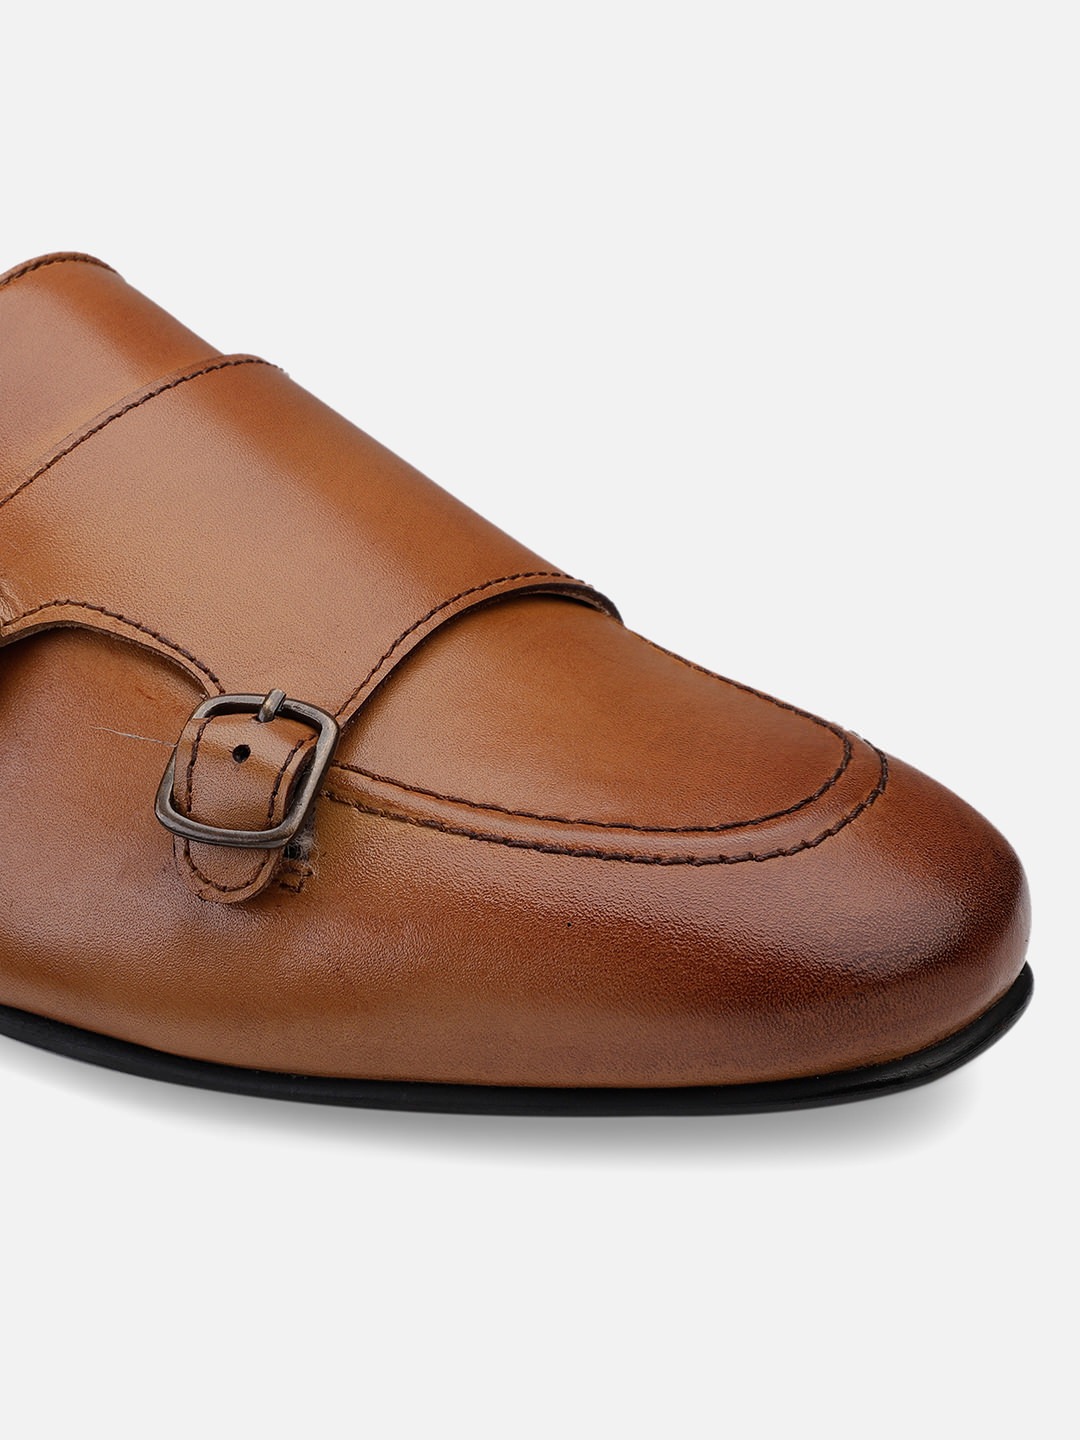 Buy Online Genuine Leather Tan Double Monk Strap Loafers